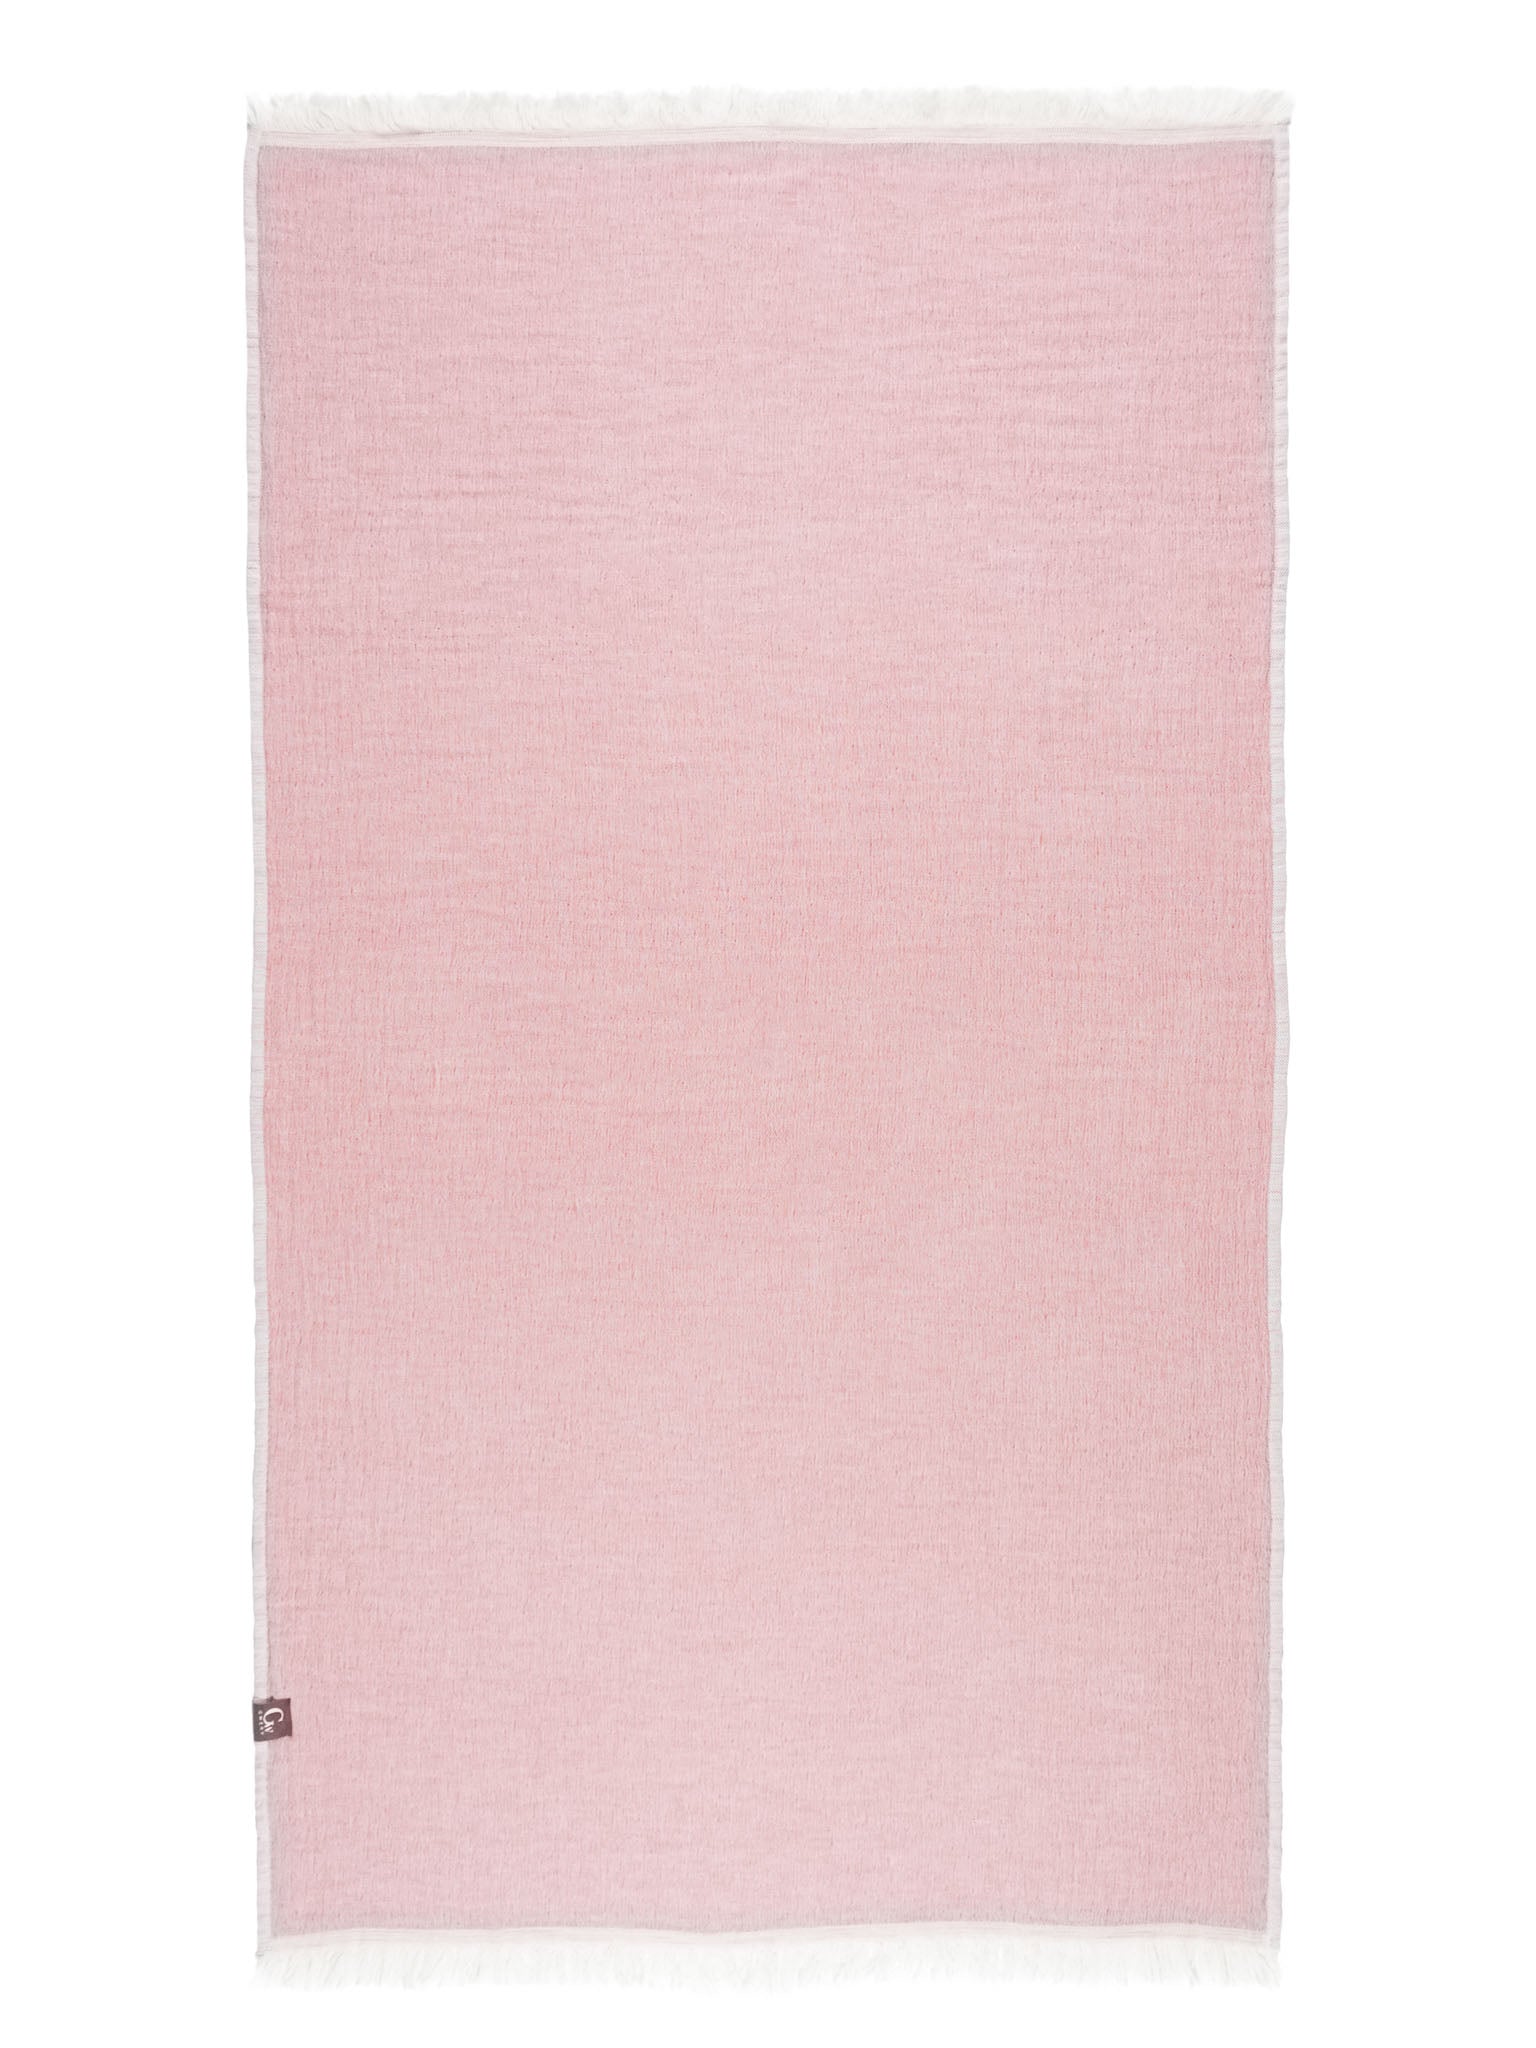 Pink patterned, double sided, beach towel open up